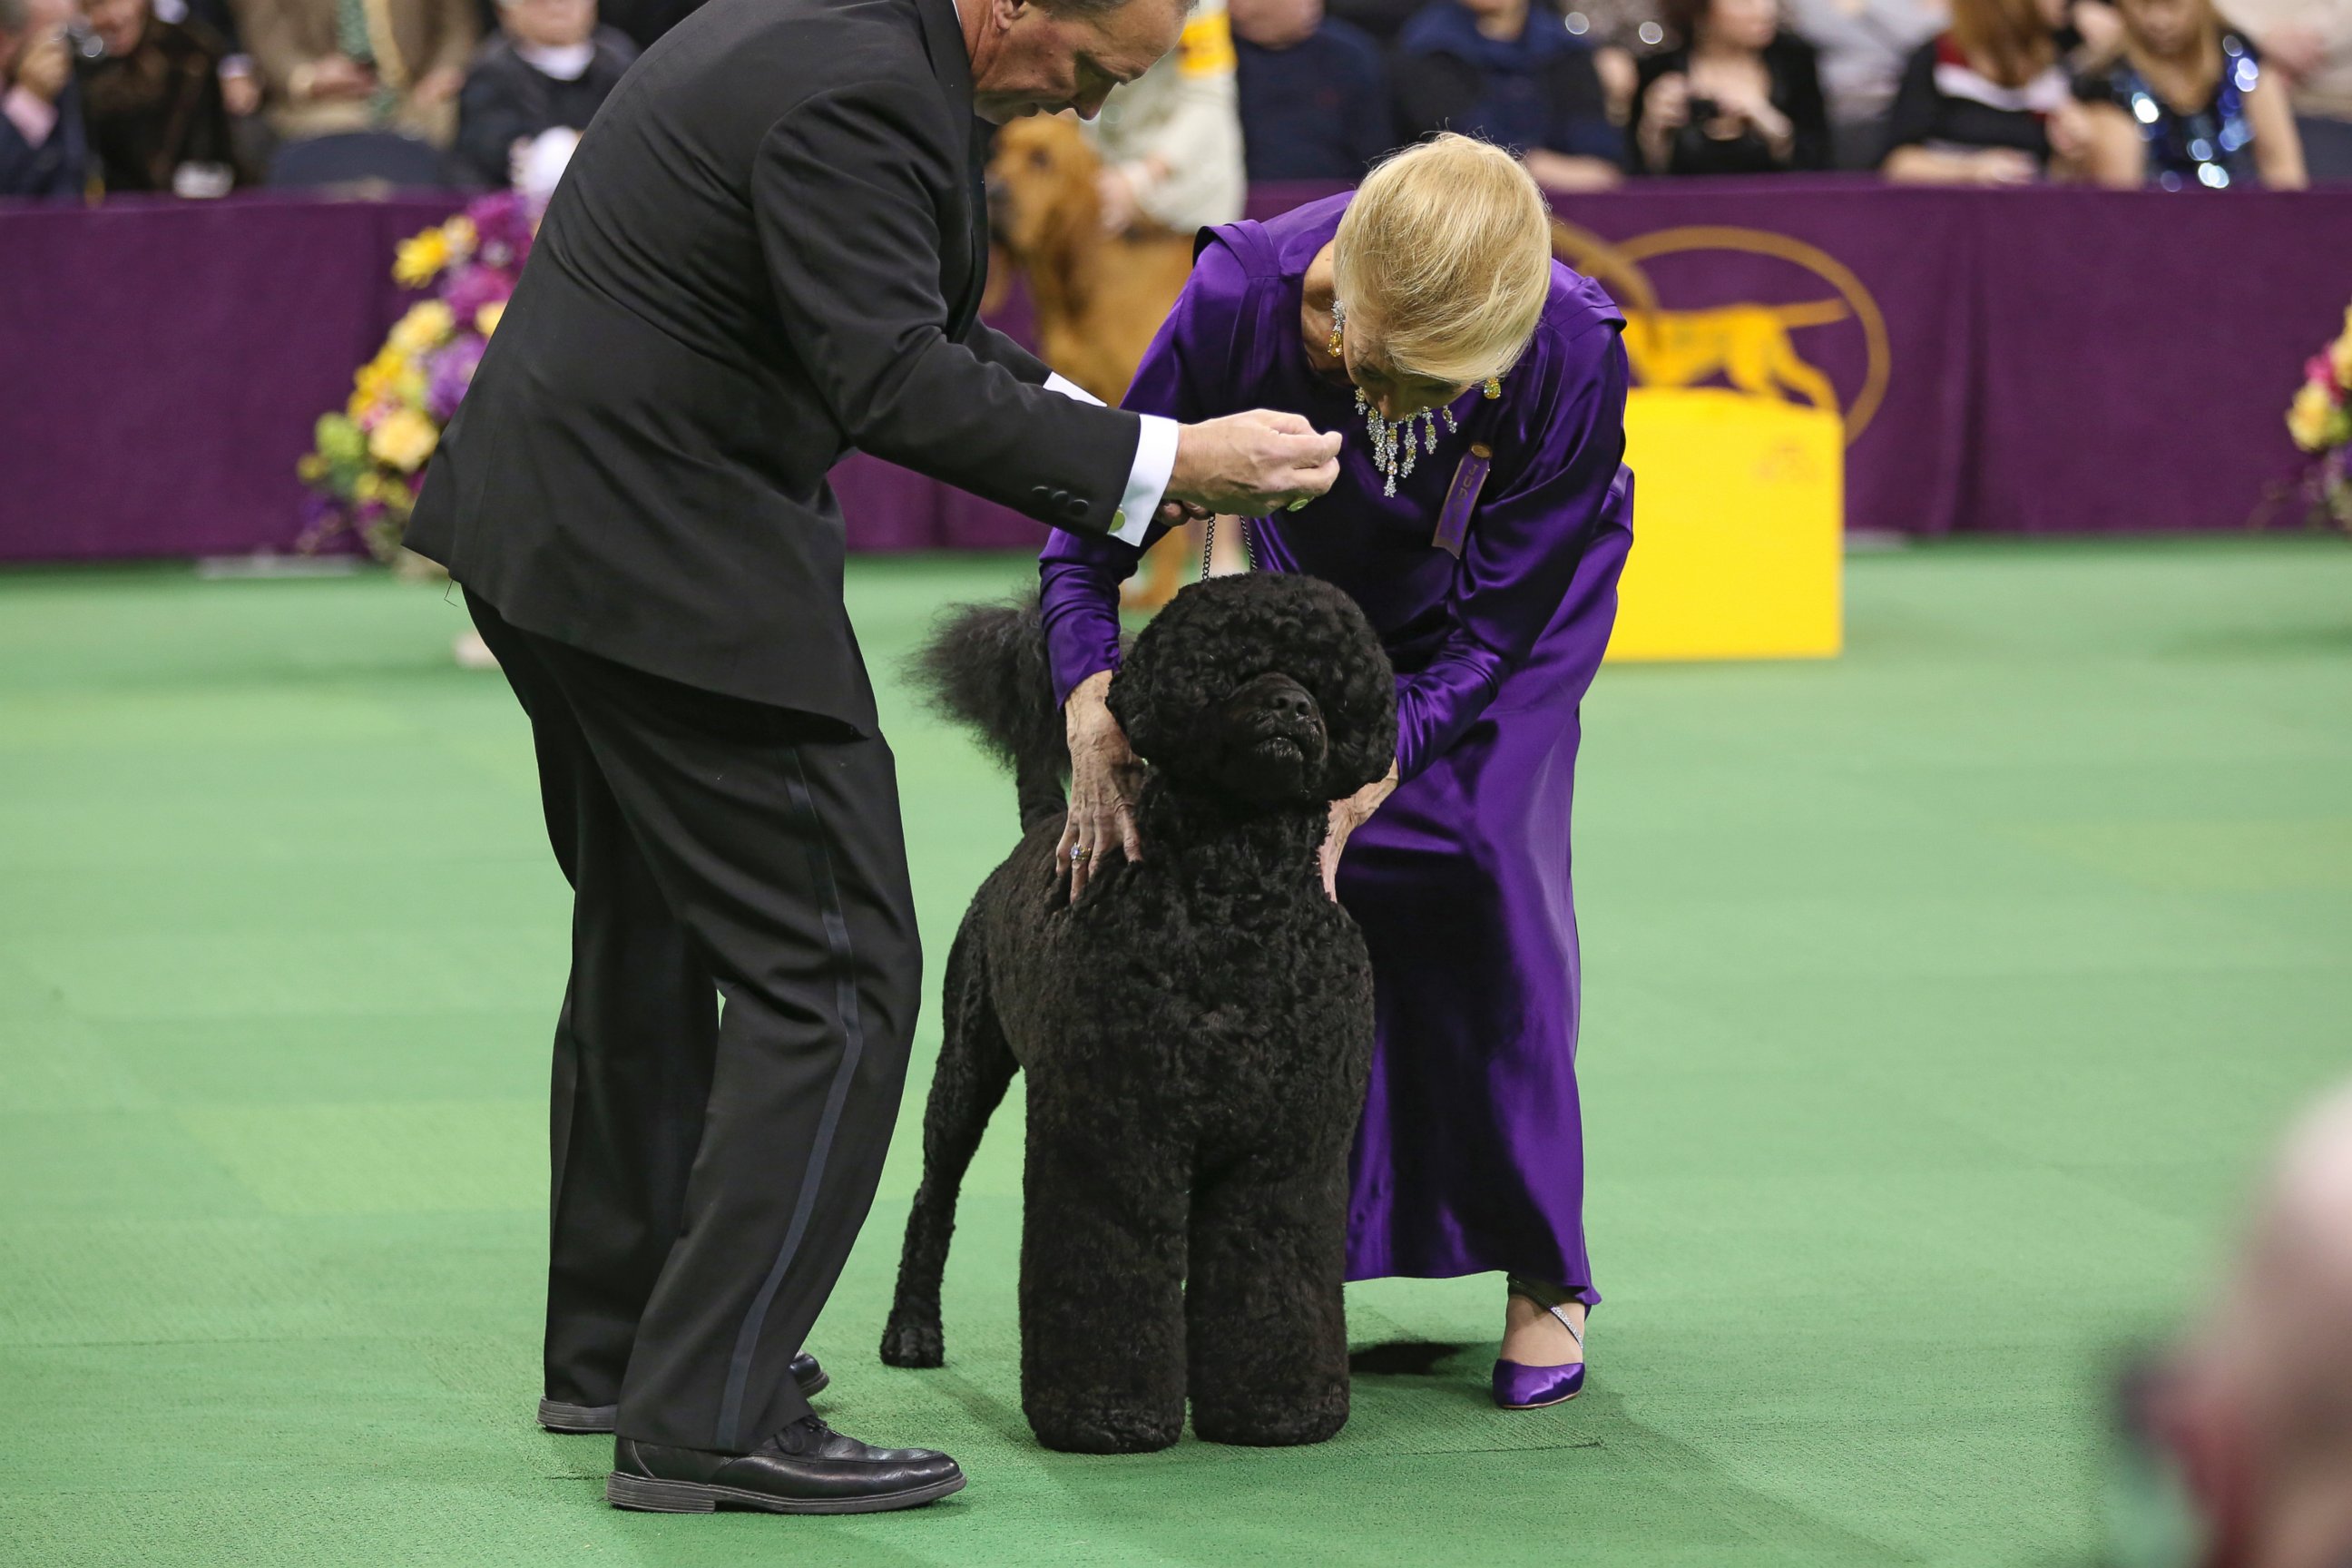 PHOTO: Matisse, a Portuguese Water Dog, at Madison Square Garden in New York, Feb. 11, 2014.